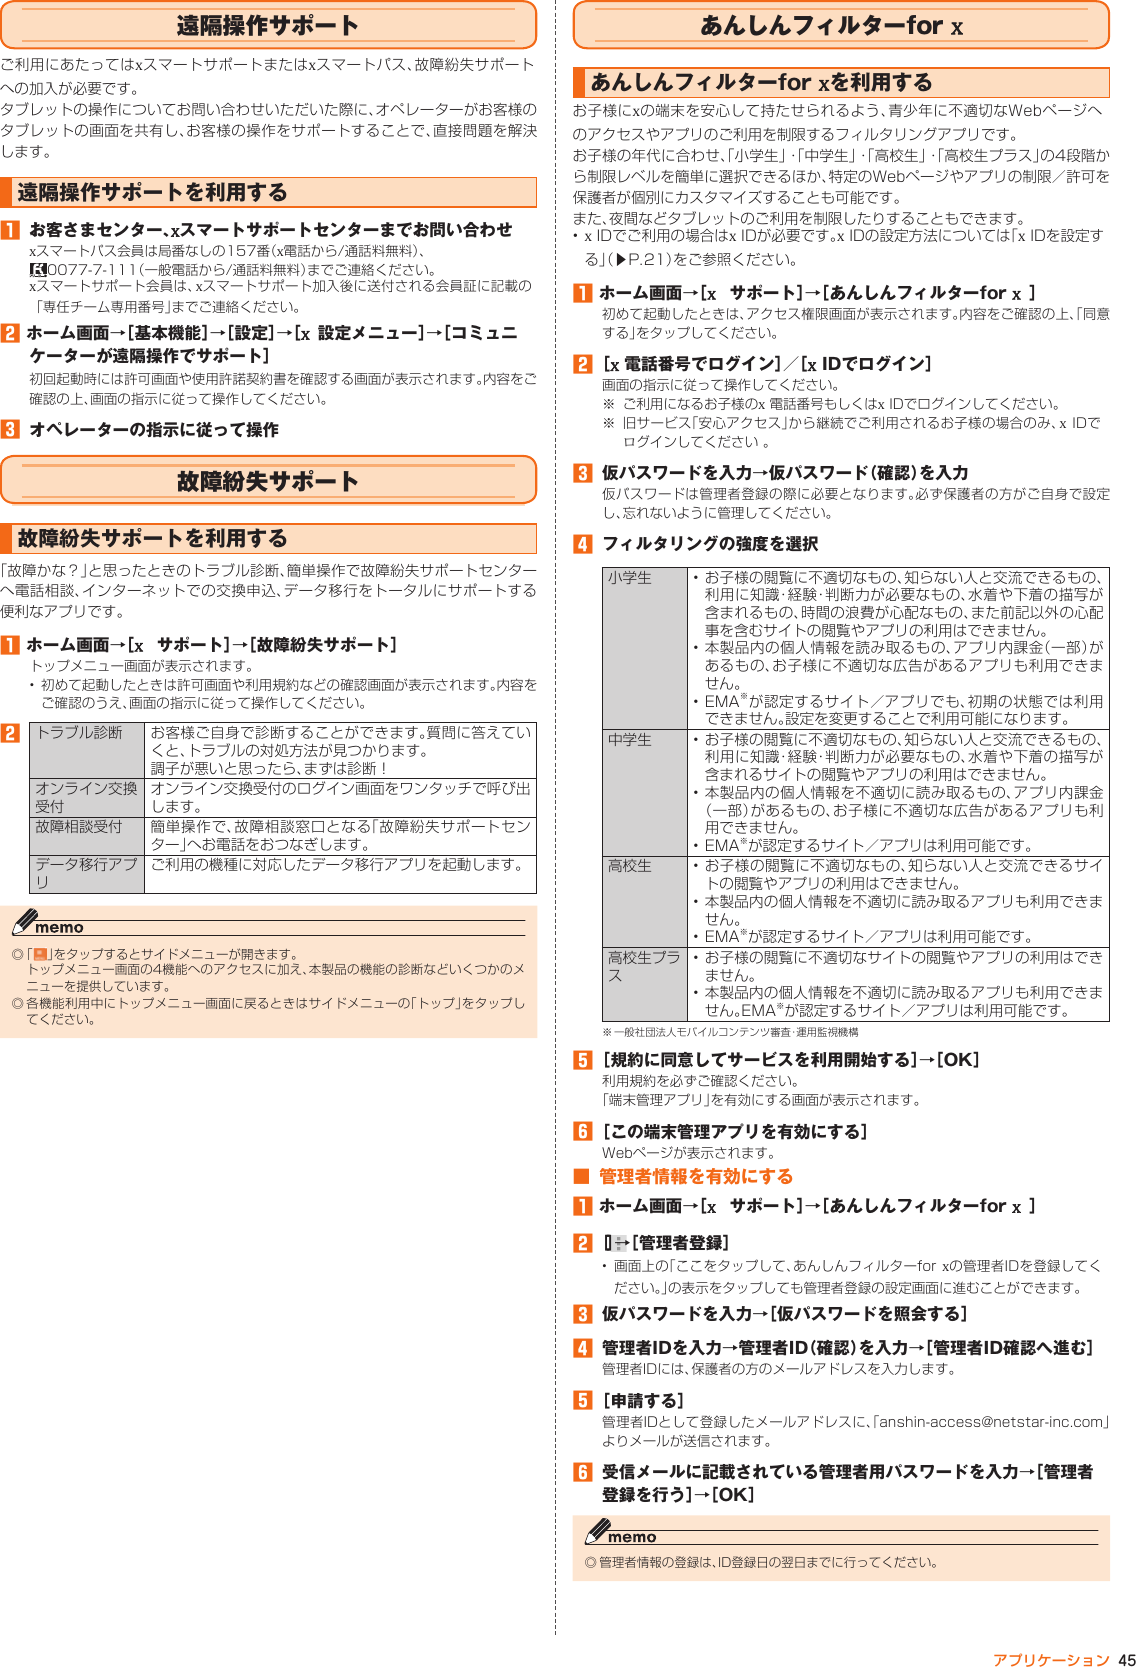 Page 41 of Kyocera FA51 Tablet User Manual part 2